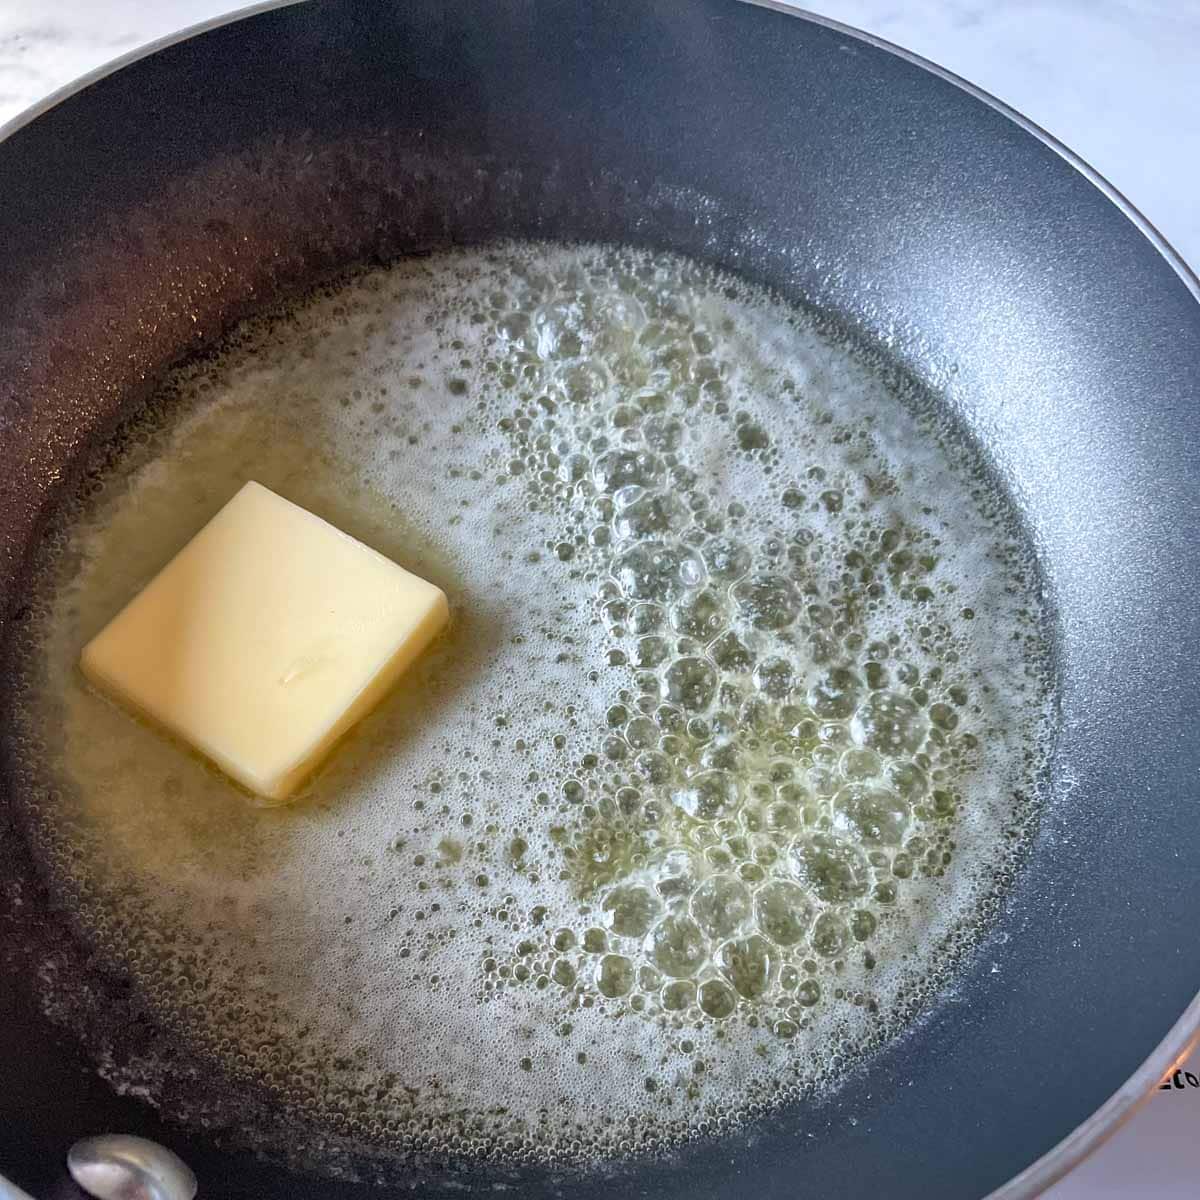 Butter is shown melting in a black nonstick pan.